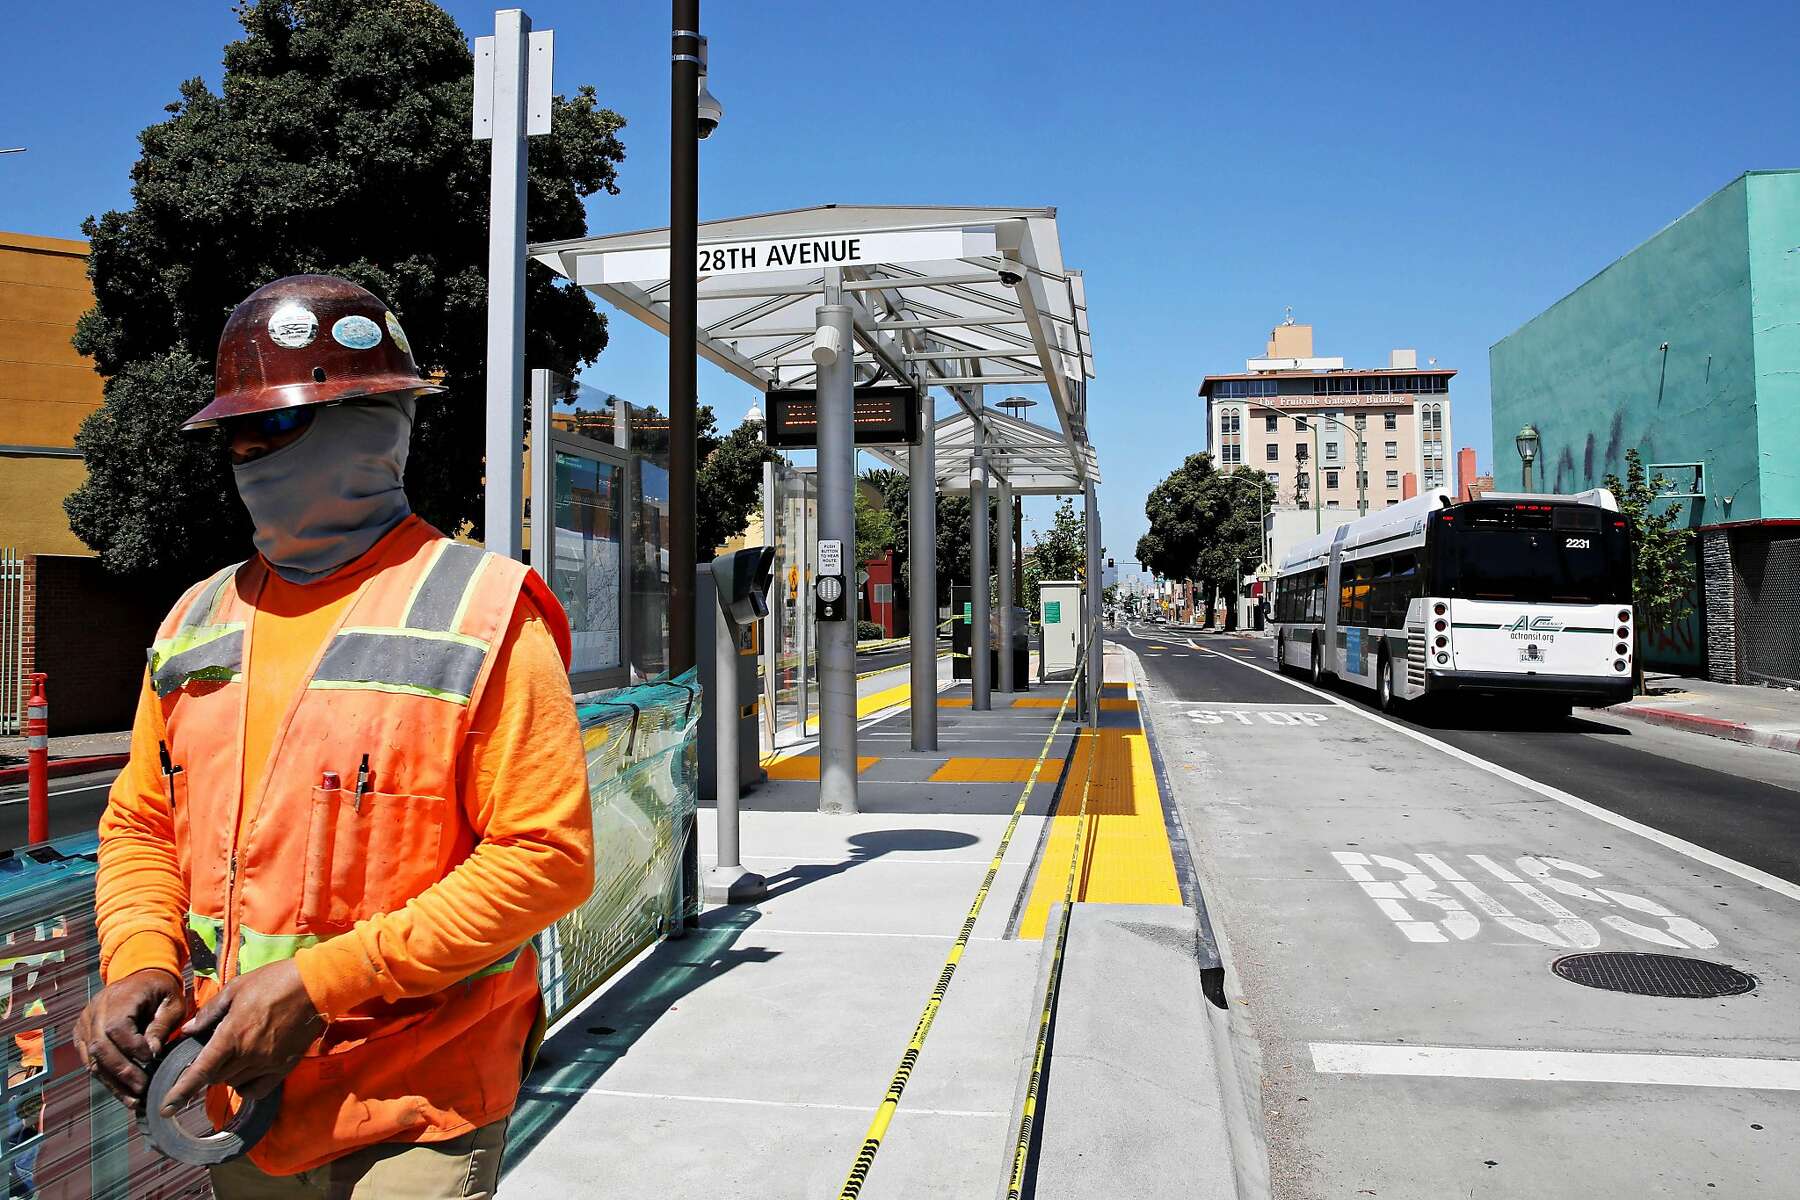 East Bay's new bus rapid transit line to bring a new Tempo to East Oakland